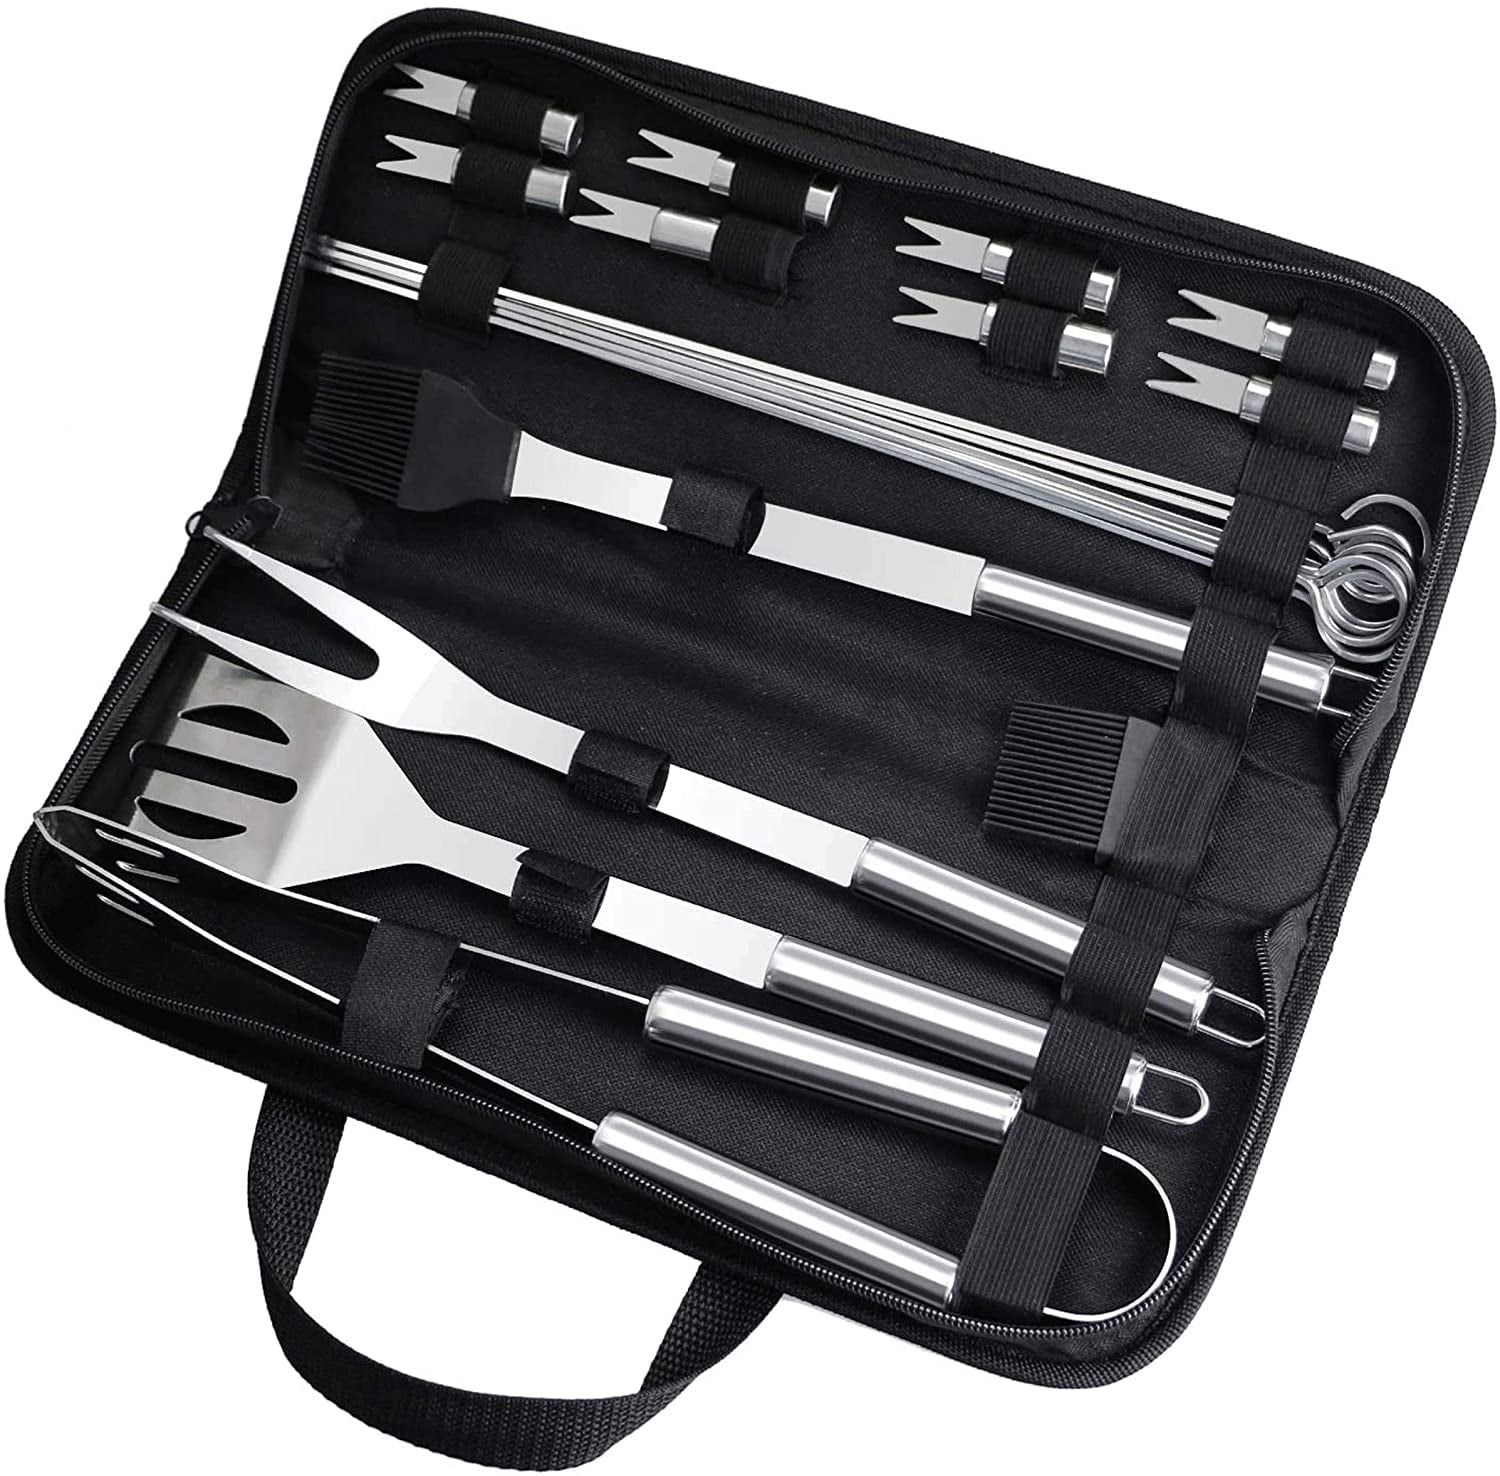 Fixget 28Pcs Barbecue Tools Stainless Steel BBQ Tools Sets BBQ Grill Tool Kit 